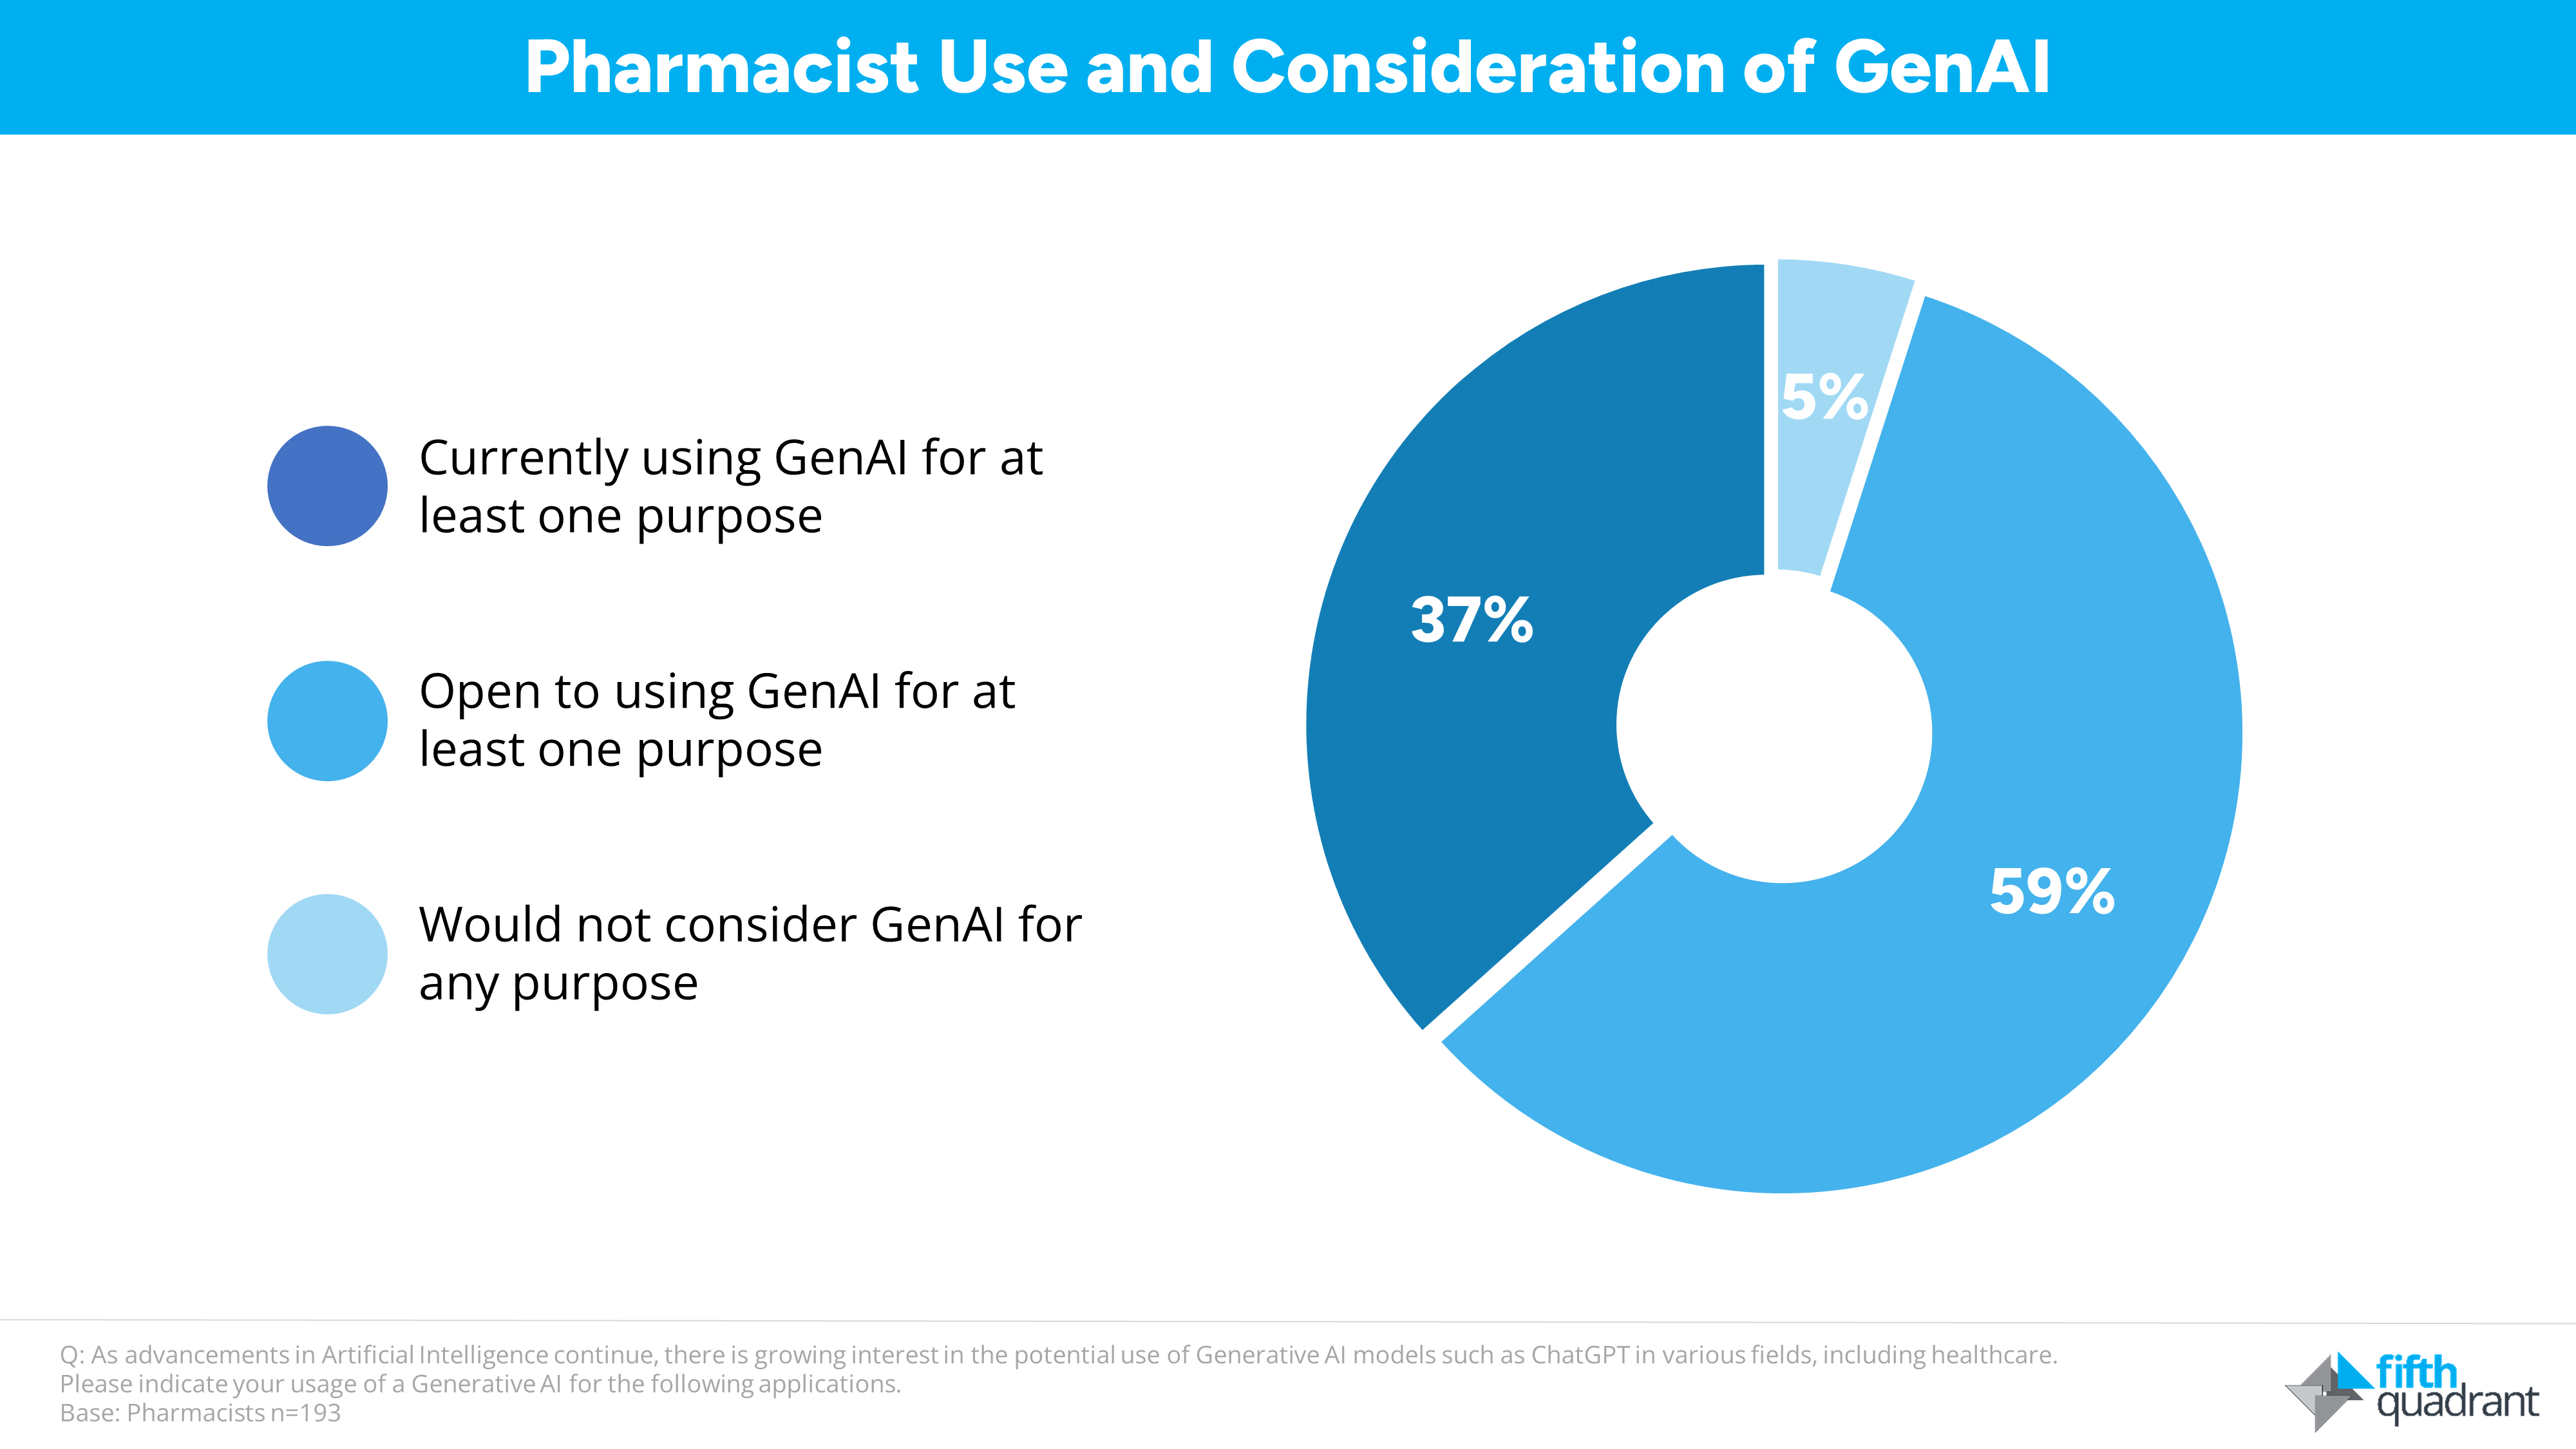 Pharmacist use and consideration of Generative AI.

Fifth Quadrant undertook a survey of 193 Australian pharmacists to understand their attitudes and use of GenAI models such as ChatGPT and Bard in their pharmacy.